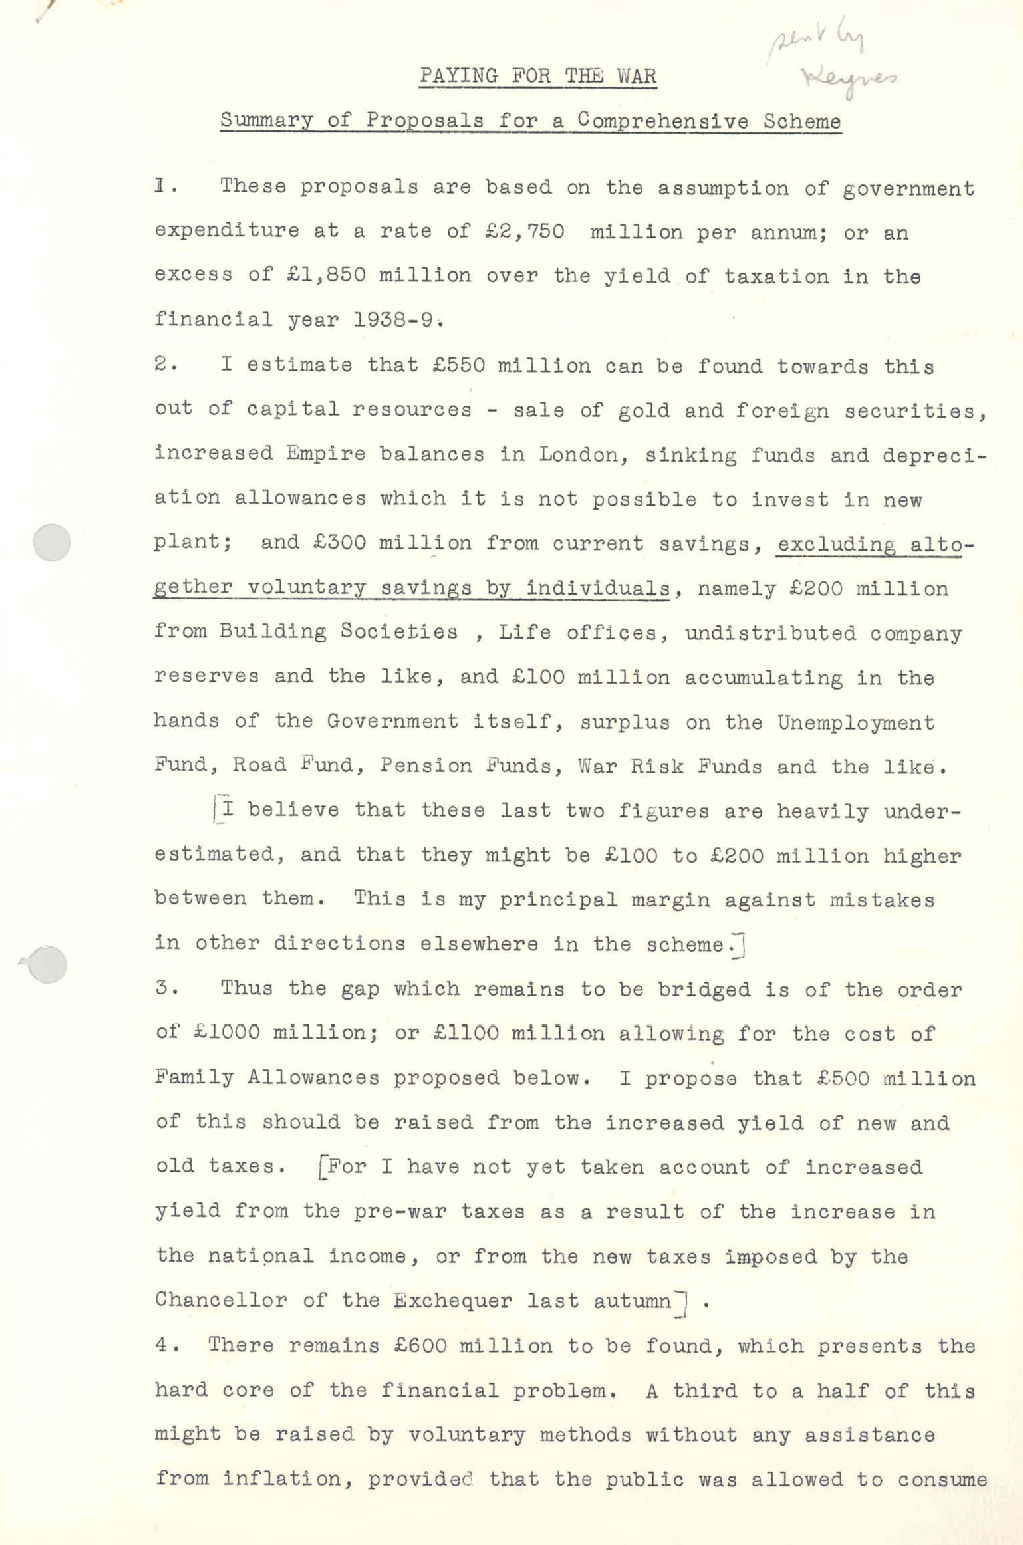 'Paying for the War: Summary of proposals for a comprehensive scheme', 22 January 1940